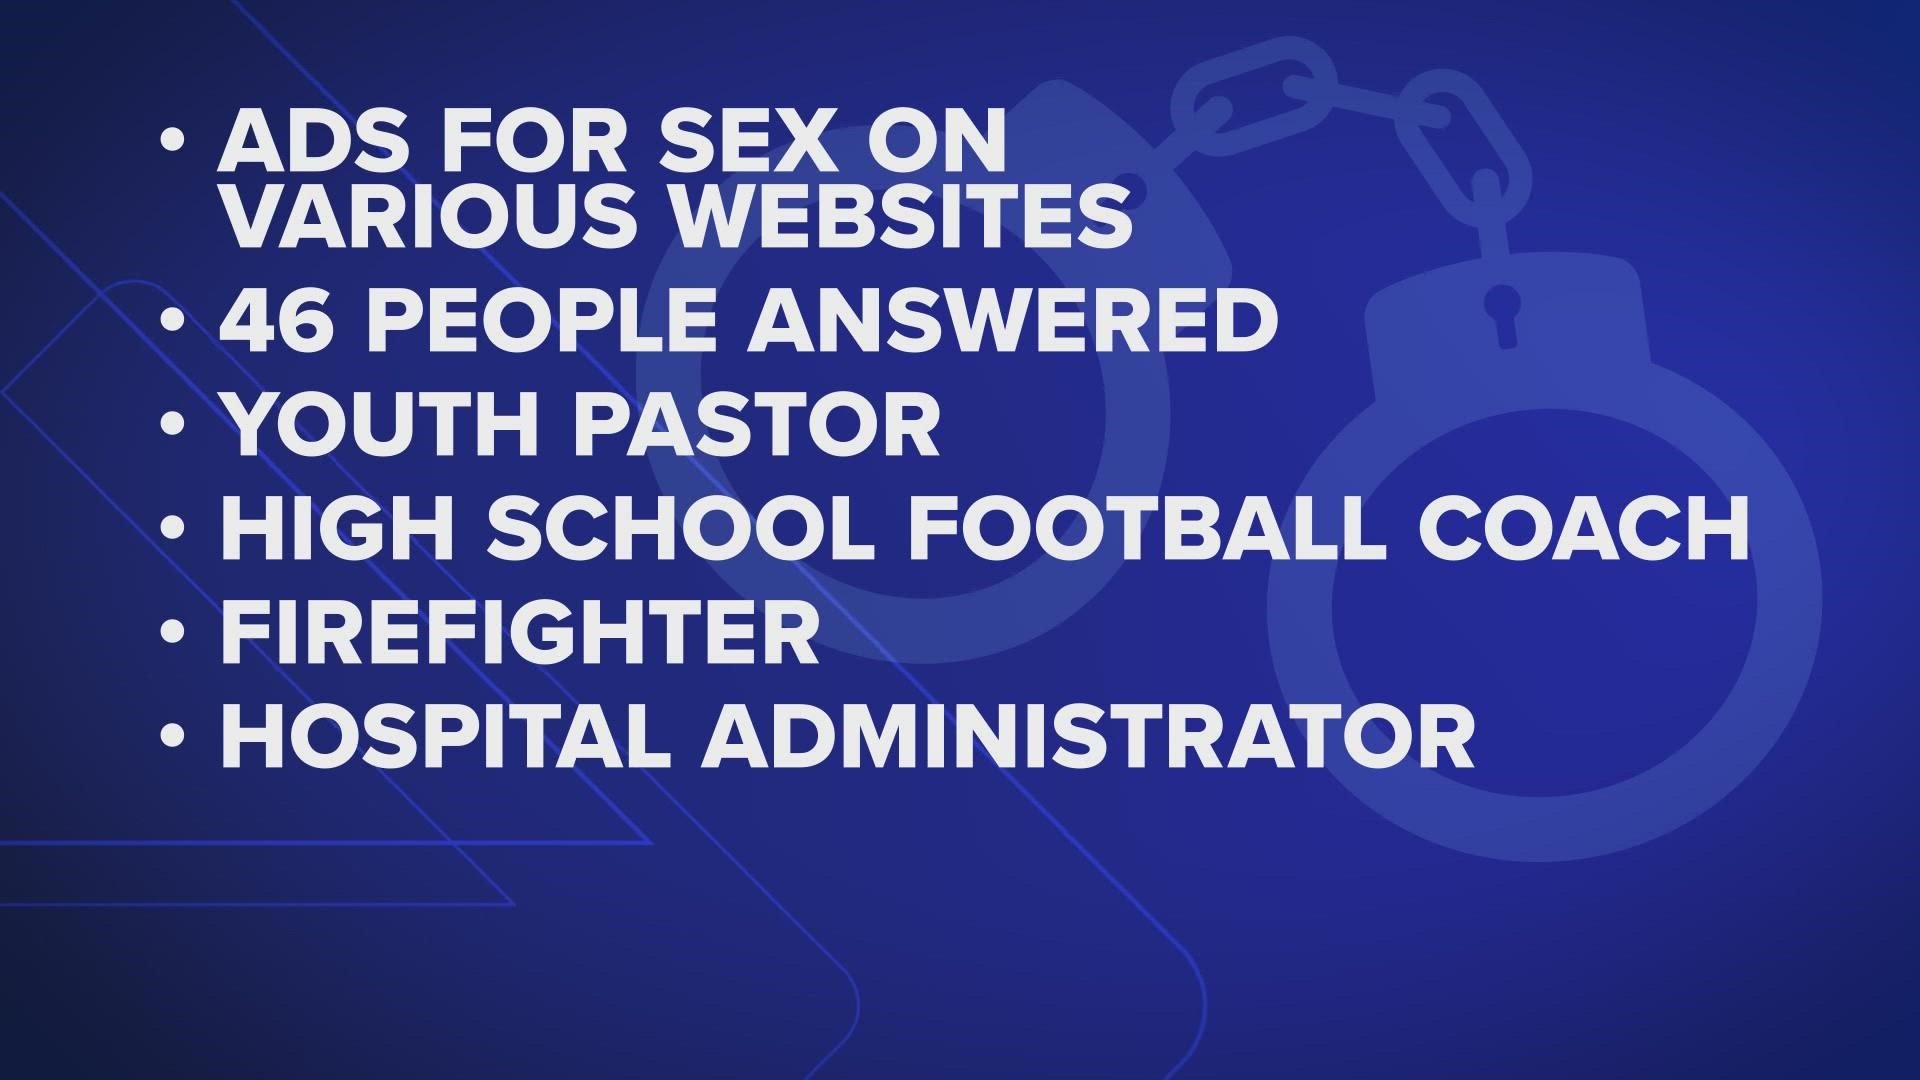 Those arrested include a youth pastor, a high school football coach and a volunteer firefighter.